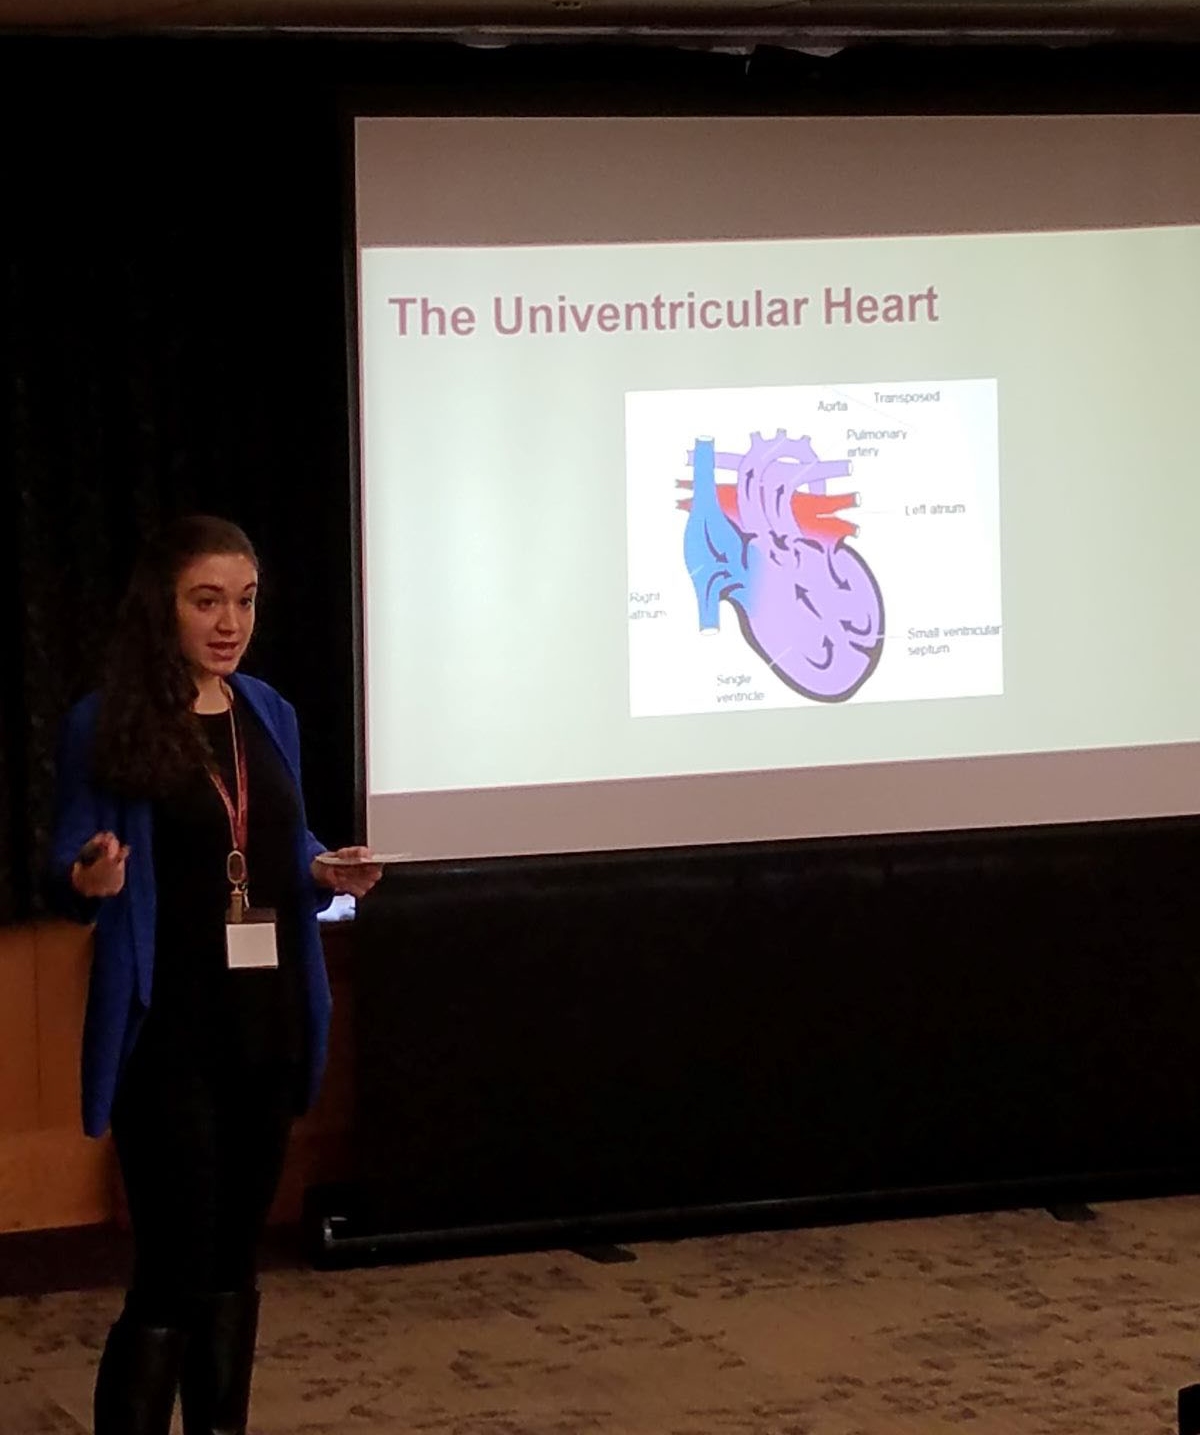 Student presenting at conference with a slide that has a diagram of a univentricular heart